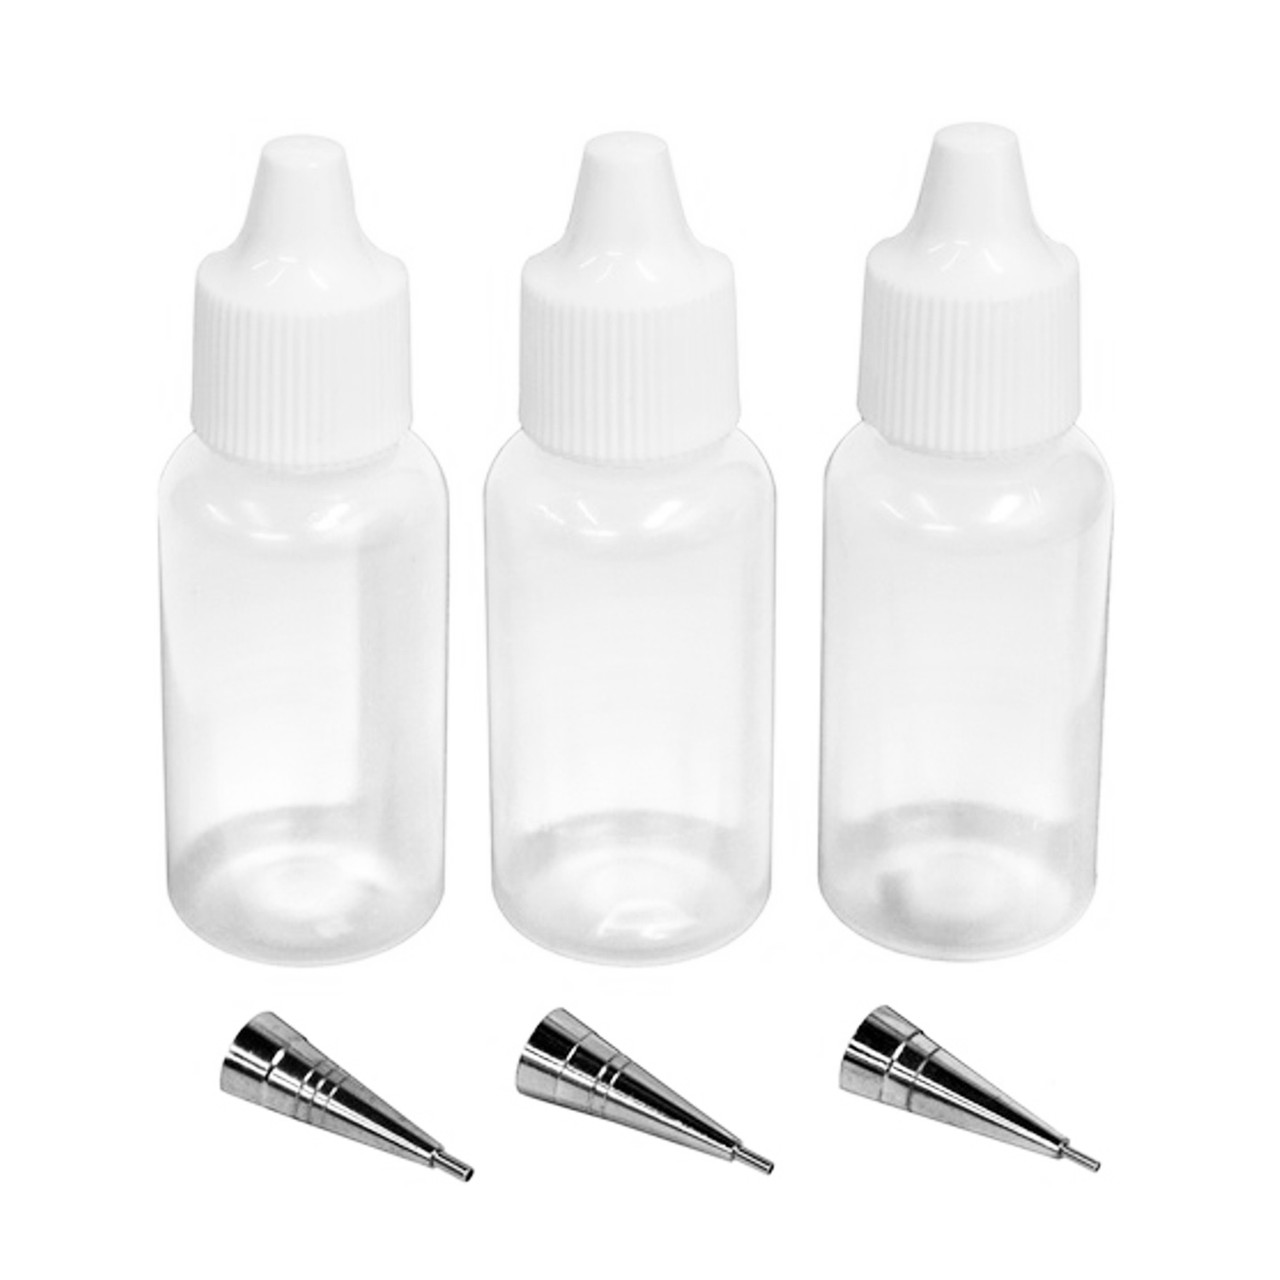 Tiny Squeeze Bottles, Pack of 3